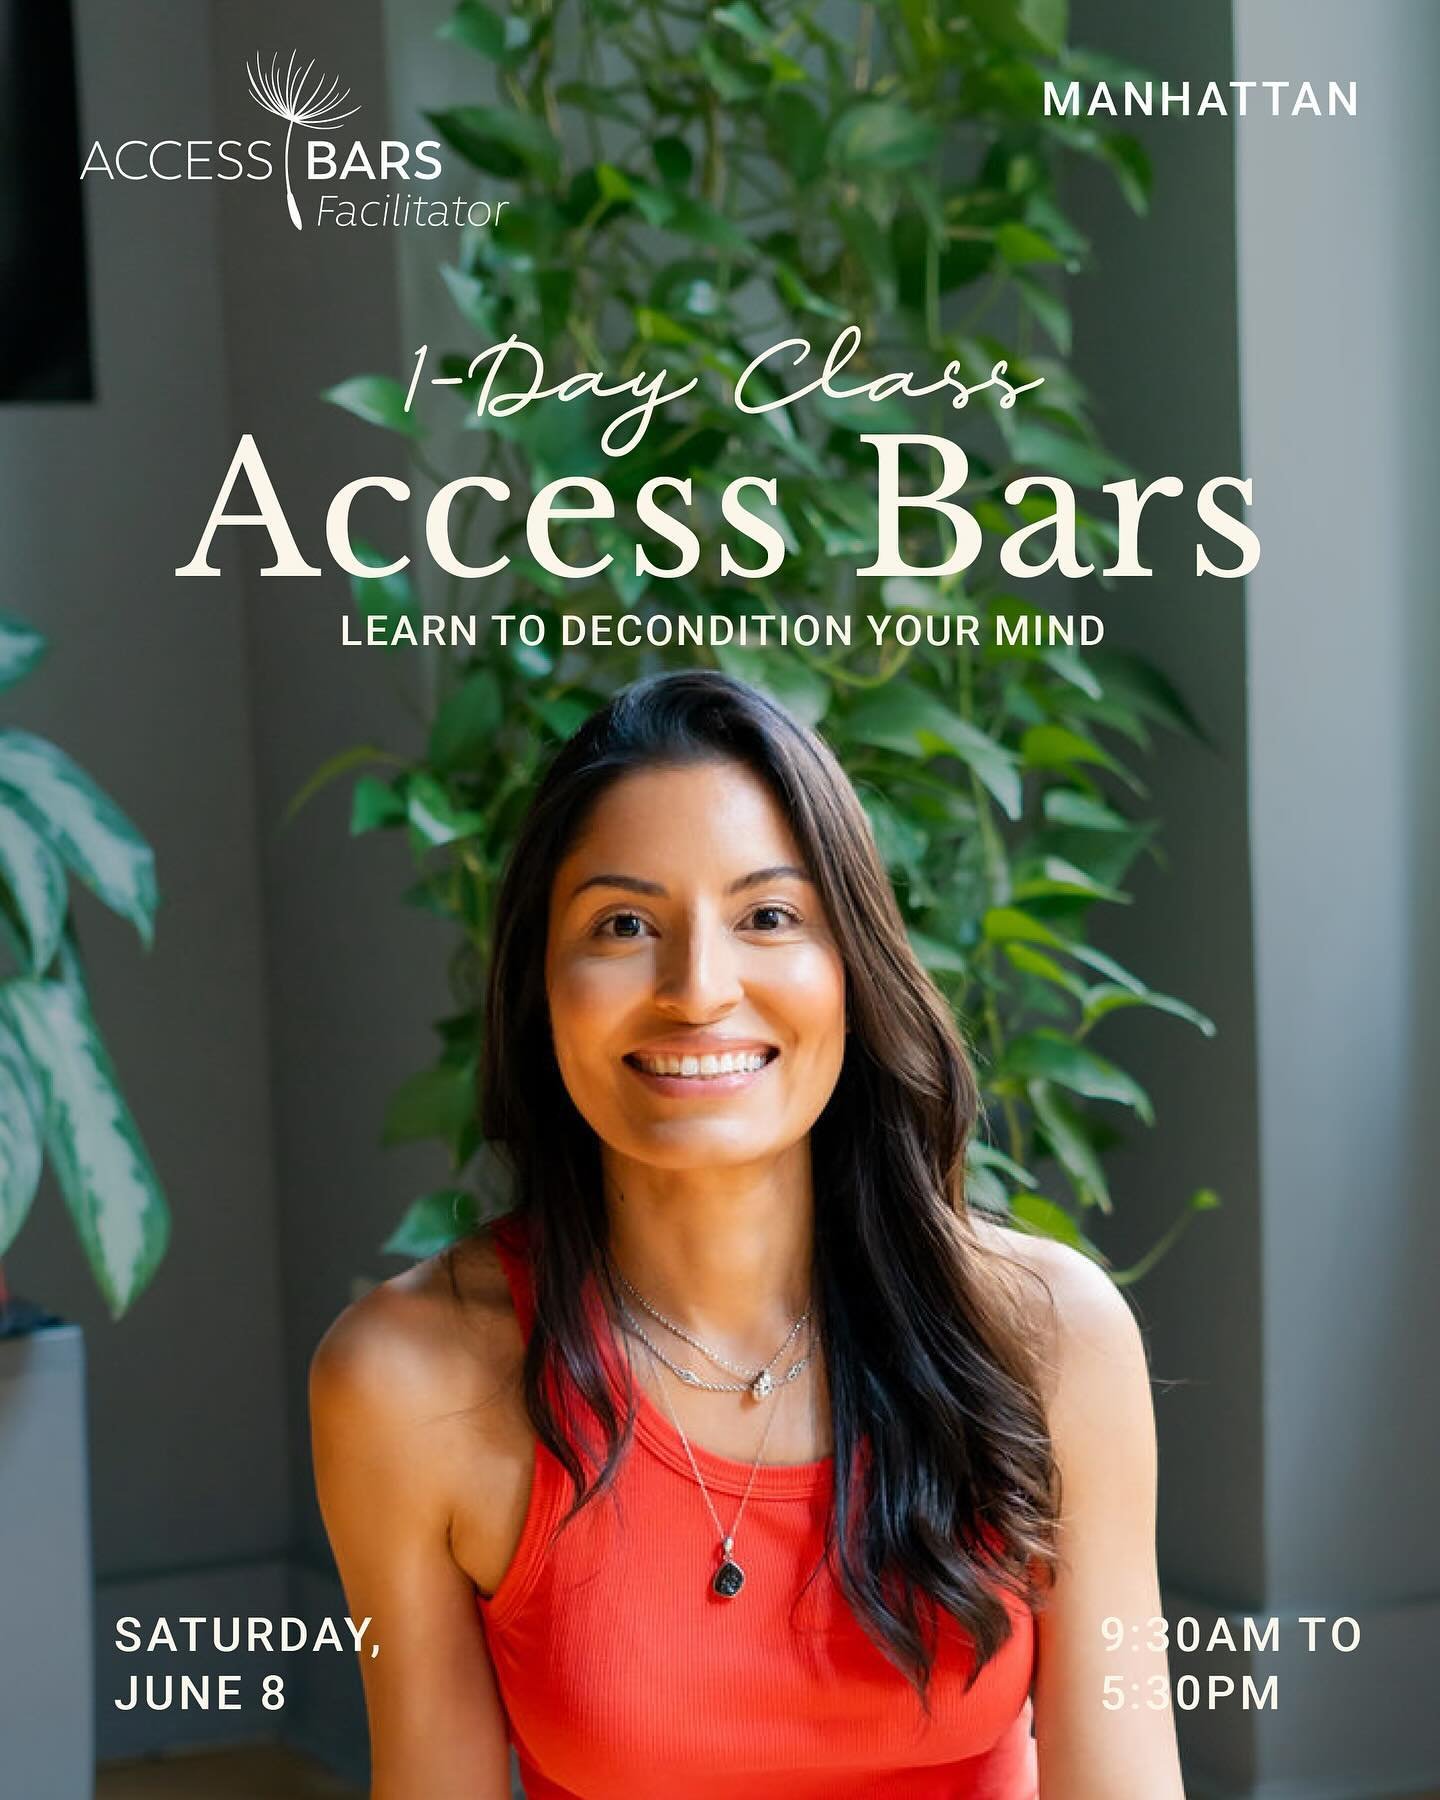 My work focuses on helping individuals decondition their mind so they can feel empowered, joyful and stimulated to reach their higher potential.

During this one-day class I teach the Access Bars technique, the tools to facilitate energy and increase